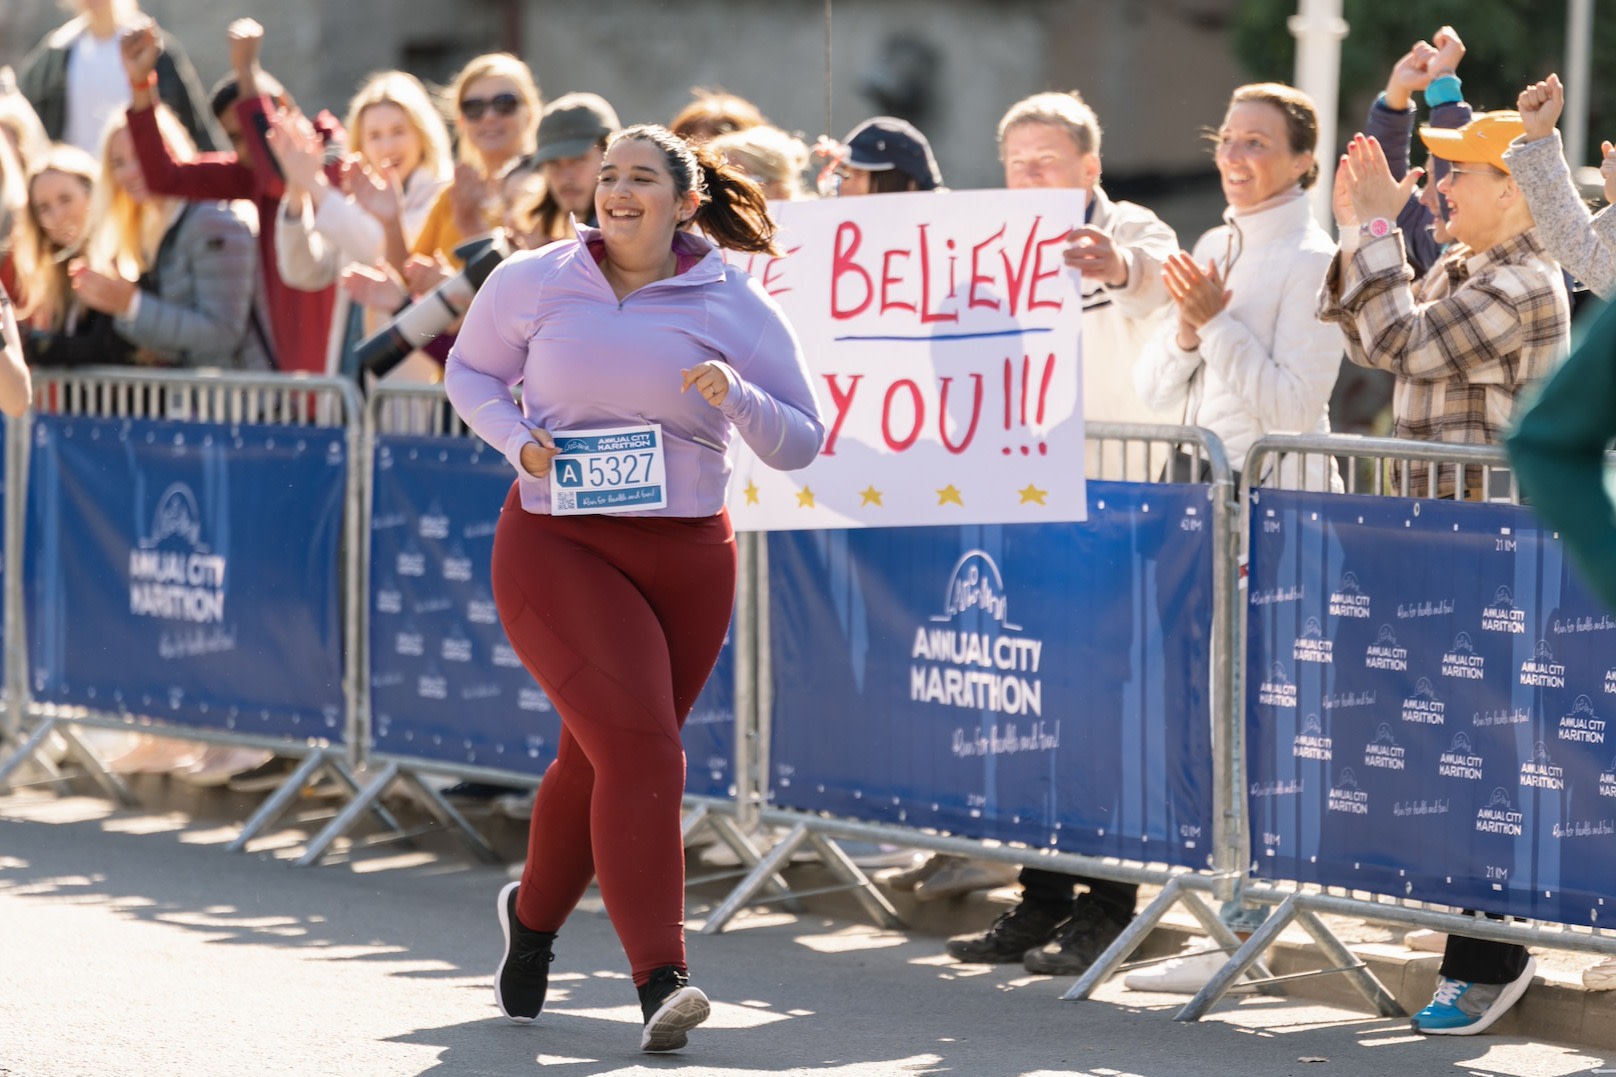 A woman happily running a marathon while a spectator behind her holds up a marathon sign that says "We believe in you!"